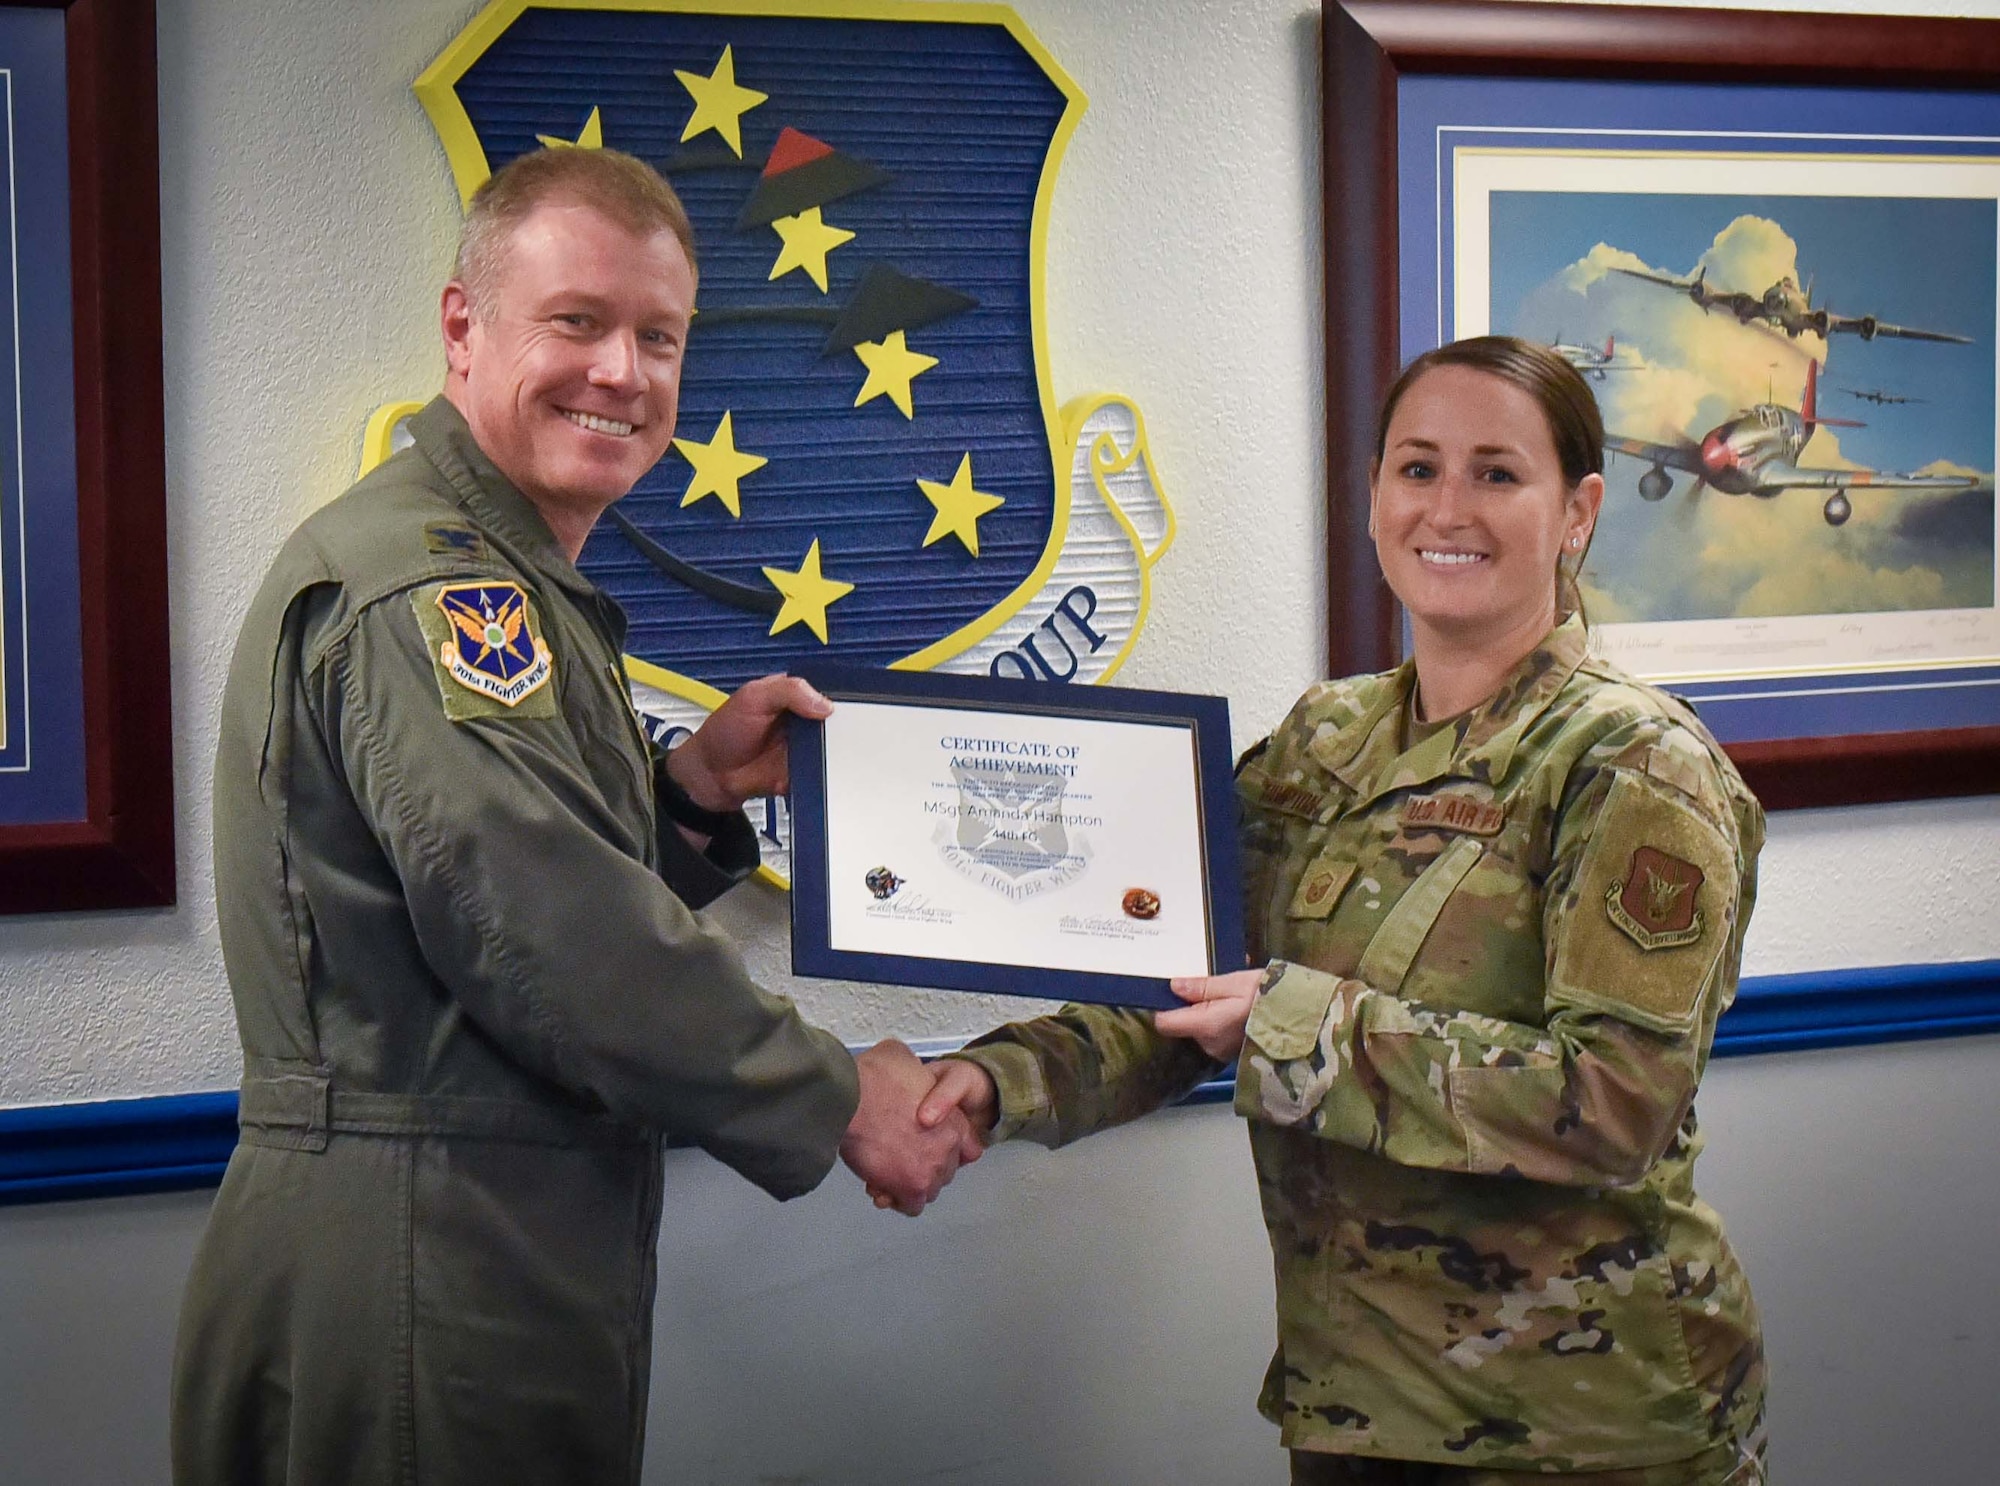 (left) 301st Fighter Wing Commander Col. Allen Duckworth recognizes 301st Fighter Squadron Superintendent Master Sgt. Amanda Hampton during the wing's visit to the 44th Fighter Group at Eglin Air Force Base, Fla., March 4. She was selected as the 44 FG Senior Non-Commissioned Officer of the Quarter for 3rd Quarter due to her skillset and preference to let others shine before herself. (U.S. Air Force photo by Master Sgt. Jeremy Roman)